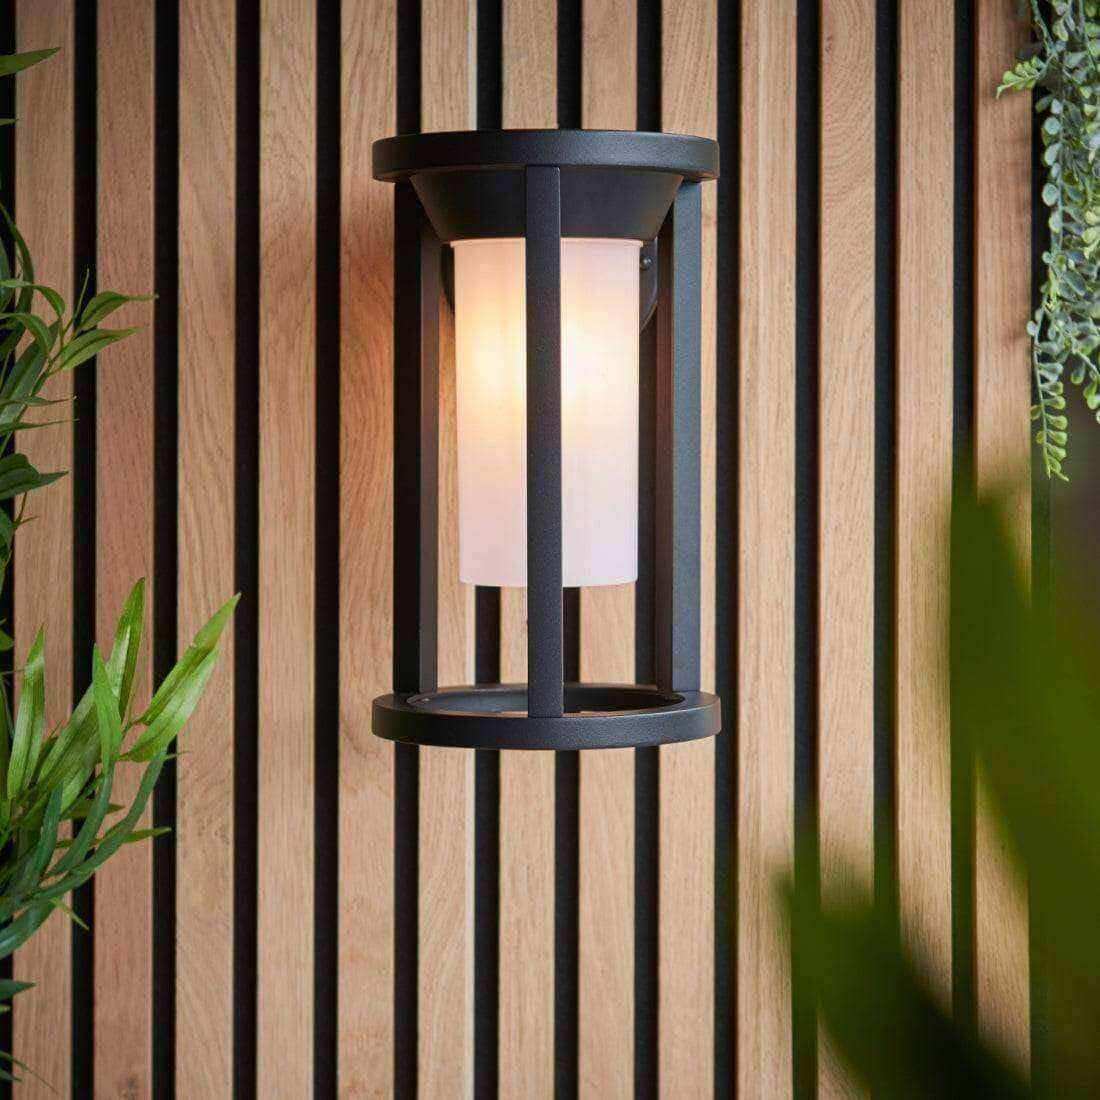 Exterior Black Cylinder Downlighting Wall Light - The Farthing